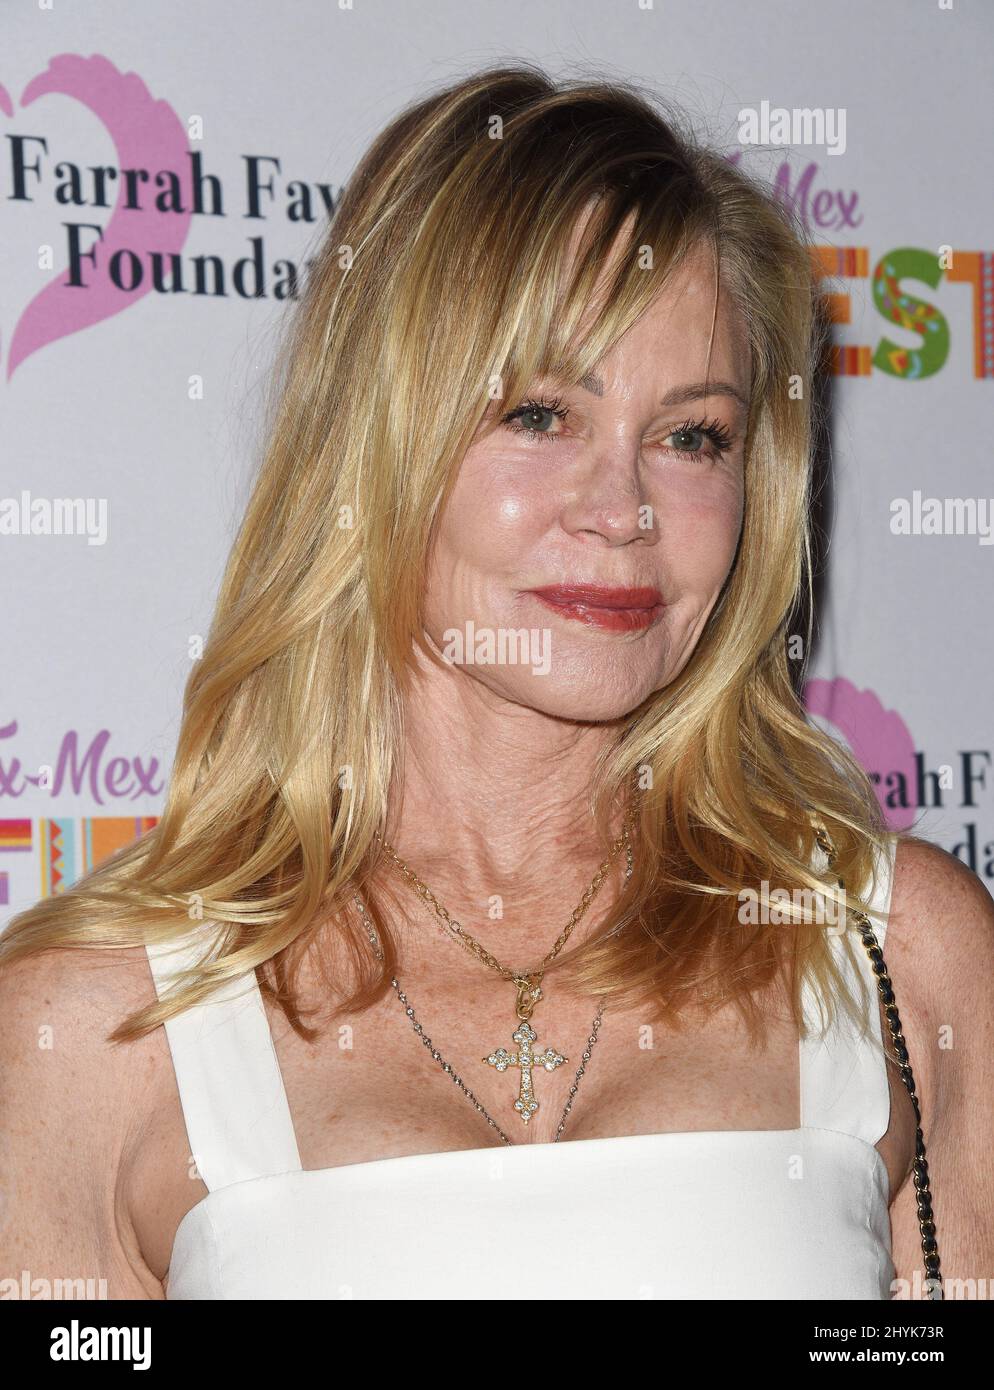 Melanie Griffith at The Farrah Fawcett Foundation's Tex-Mex Fiesta held at the Wallis Annenberg Center for the Performing Arts on September 6, 2019 in Beverly Hills, USA. Stock Photo